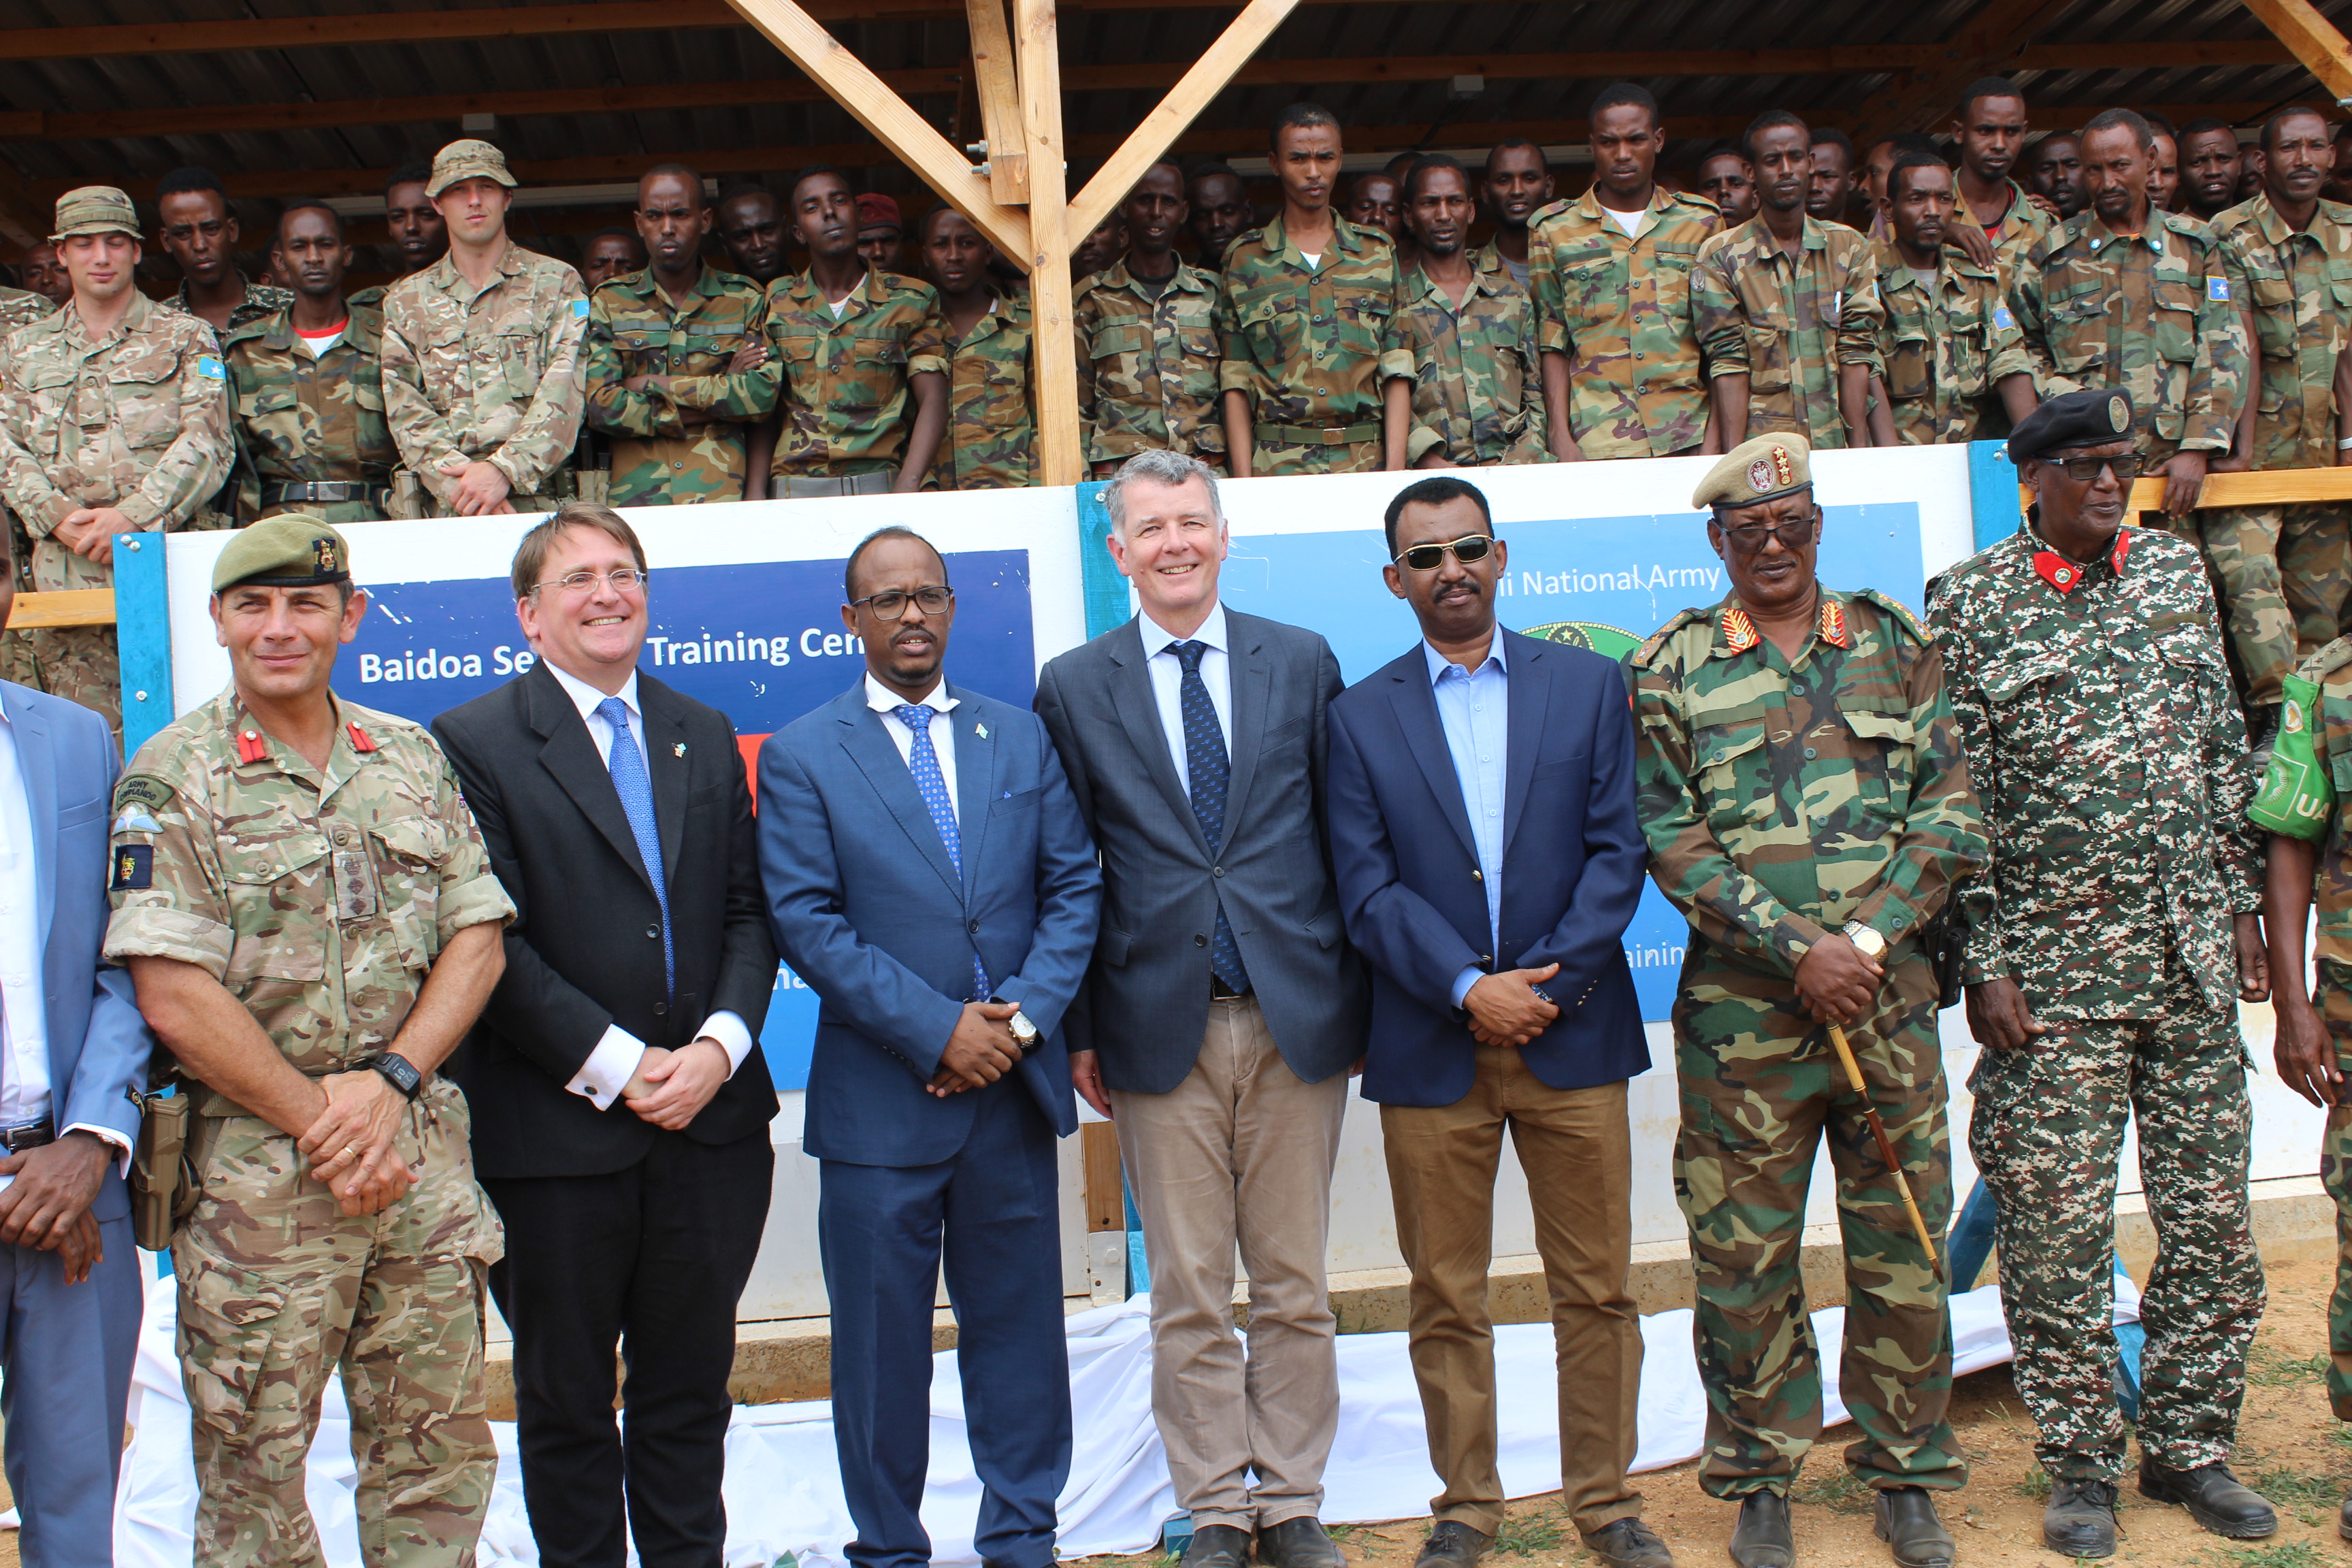 UK opens new training centre for the Somali National Army in Baidoa